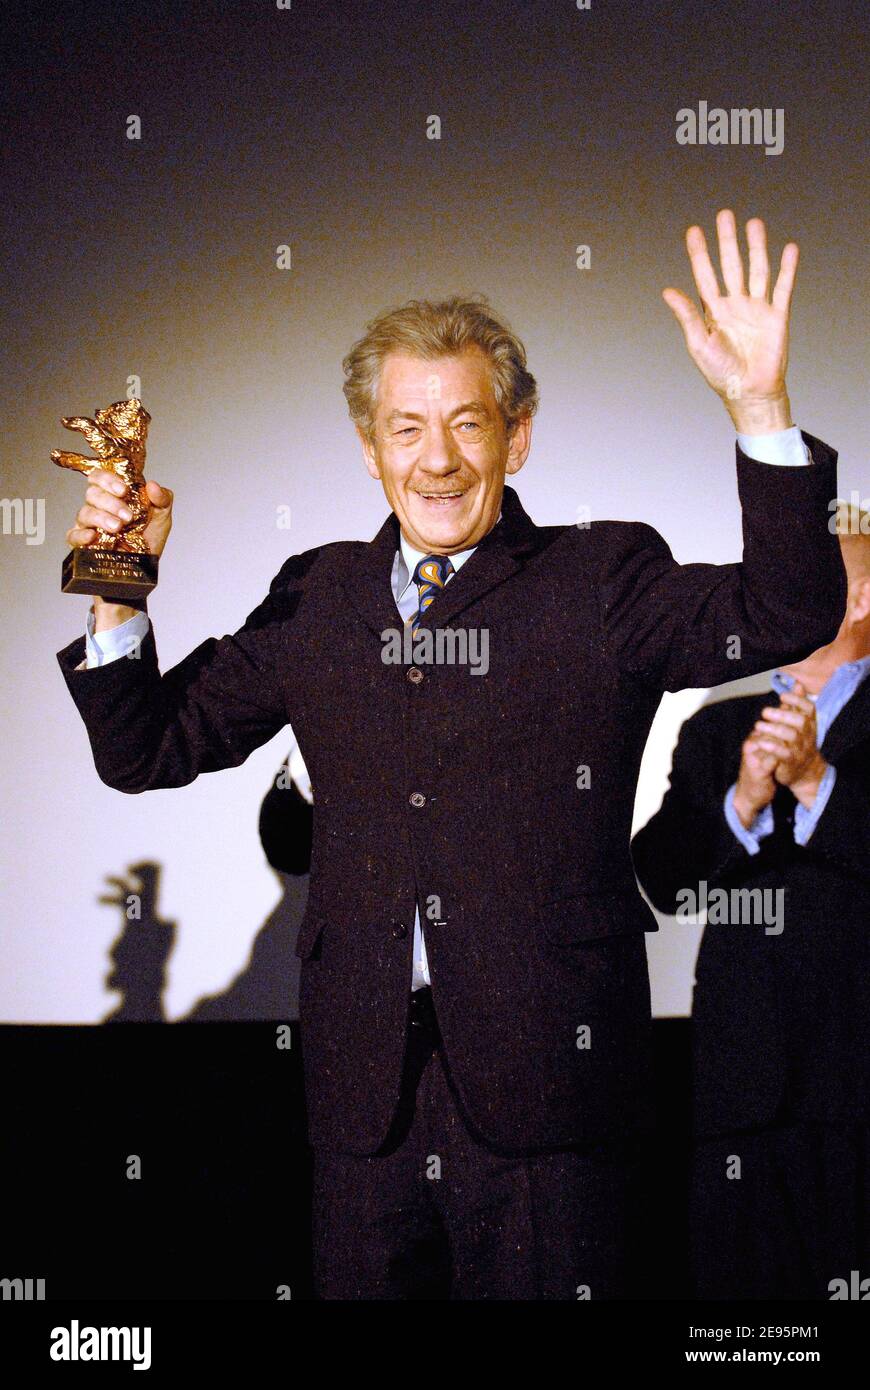 British actor Sir Ian McKellen displays his 'Golden Bear' at the 56th Berlinale, International Film Festival in Berlin, Germany, on February 11, 2006. McKellen was awarded with a Honorary Golden Bear for his lifetime achievements. Photo by Bruno Klein/ABACAPRESS.COM Stock Photo